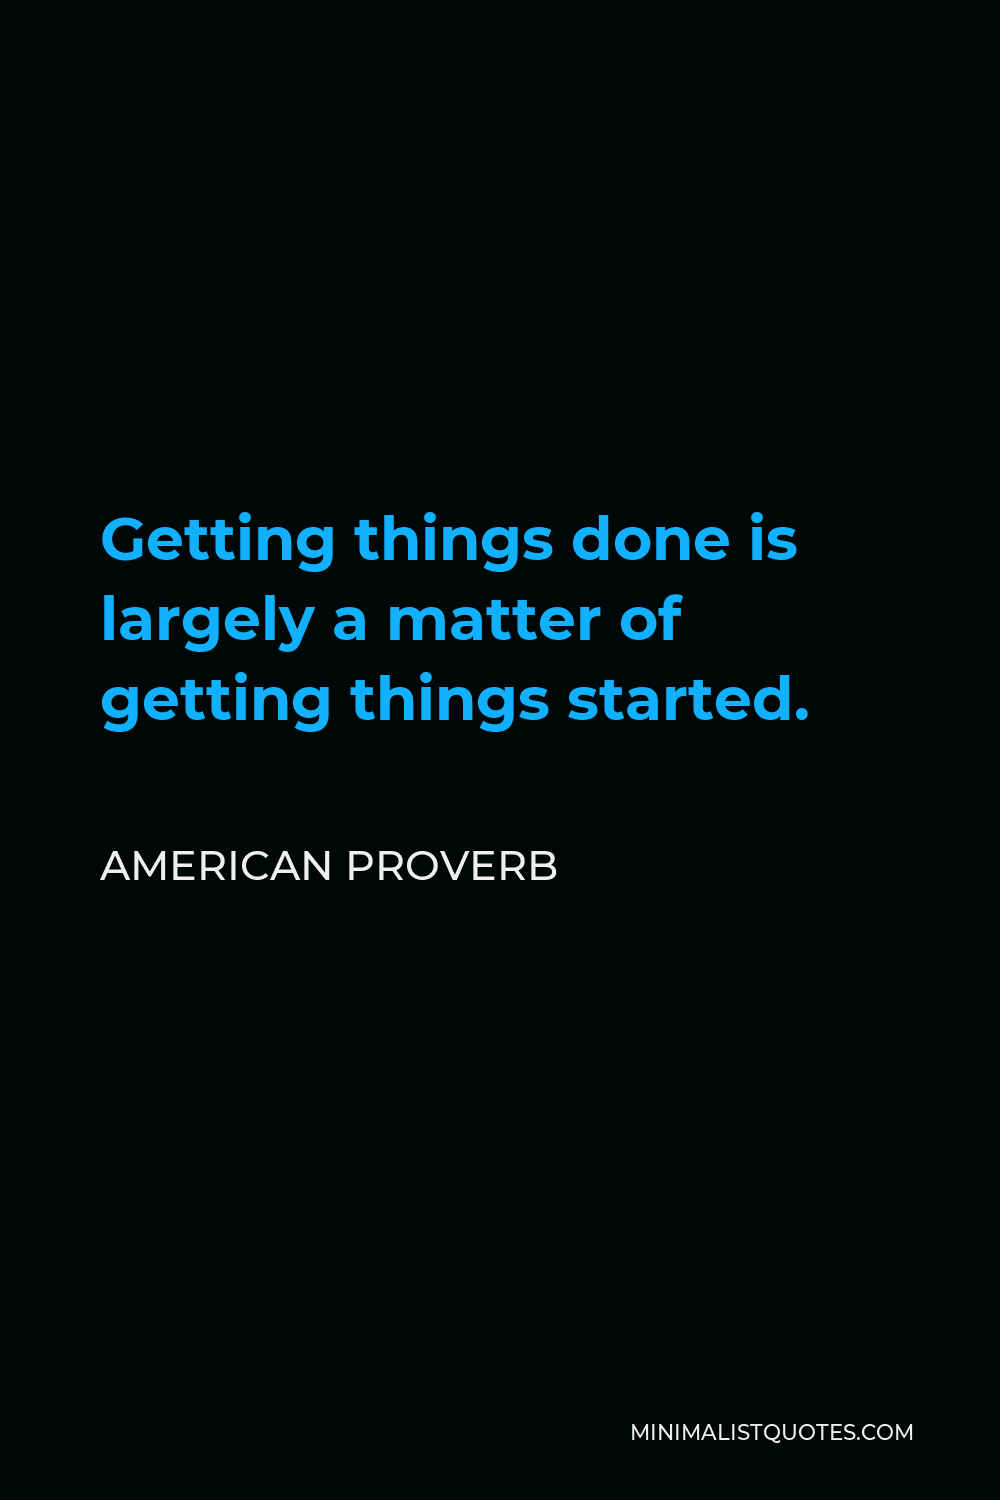 American Proverb Quote - Getting things done is largely a matter of getting things started.